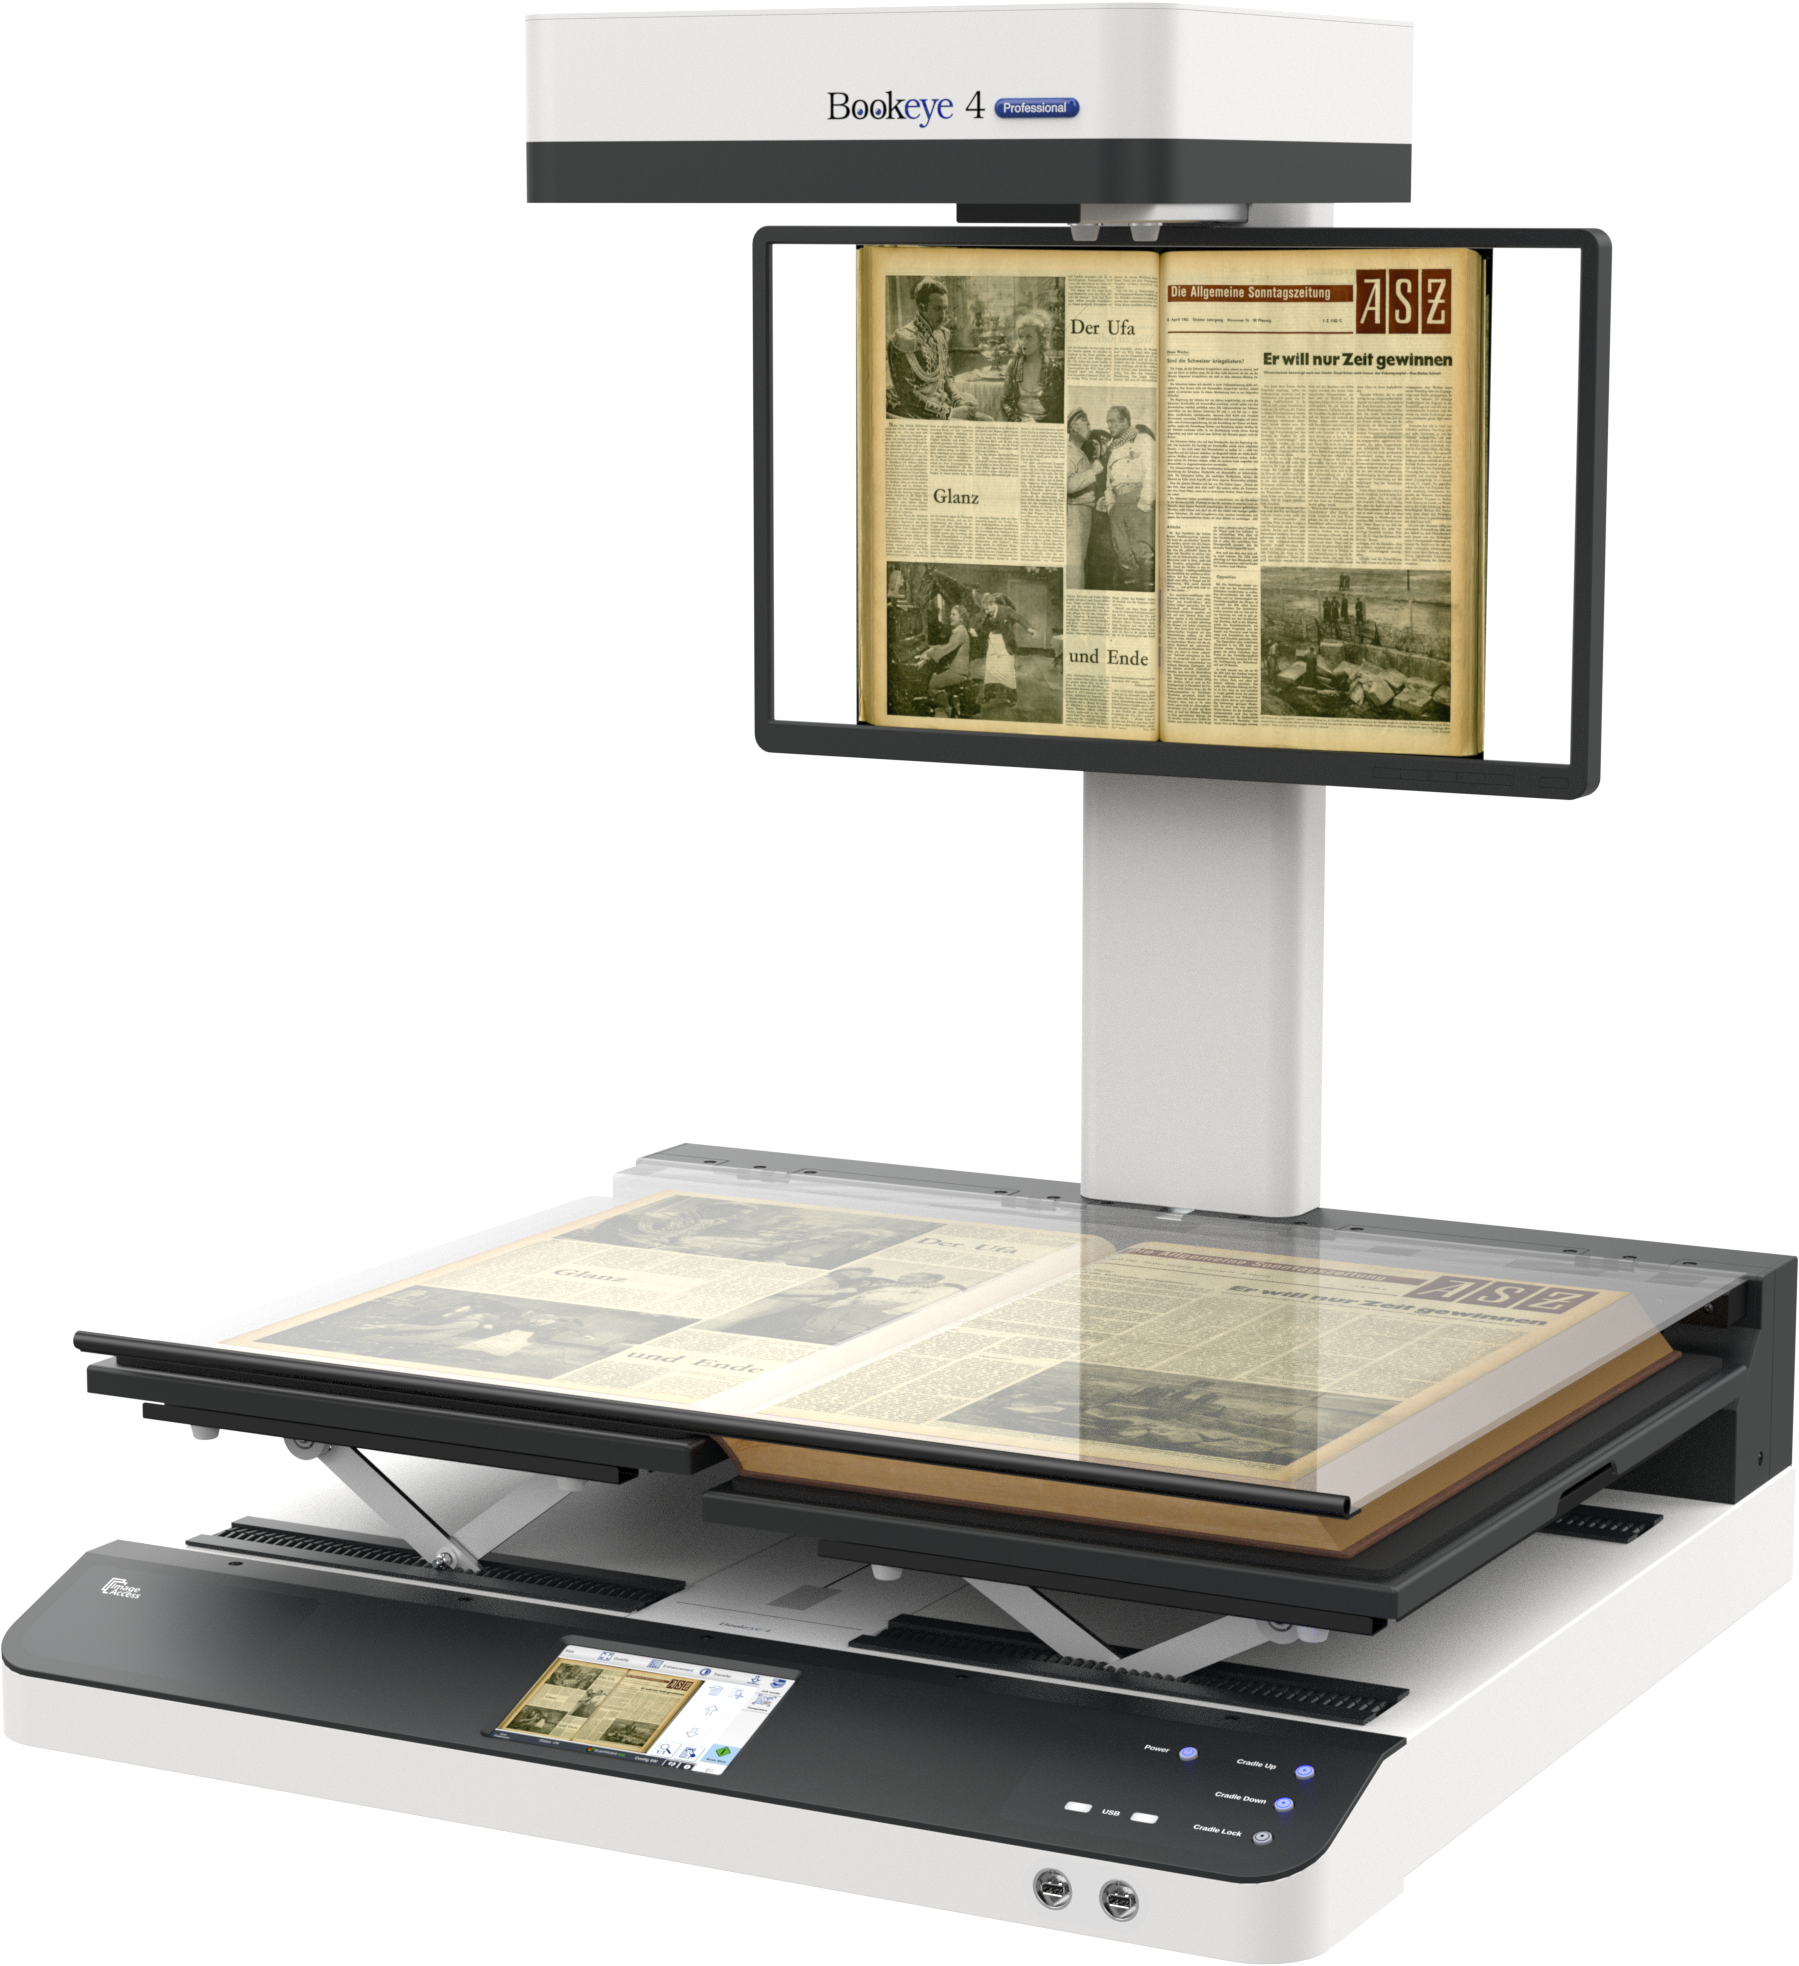 BOOKEYE 4 V1A PROFESSIONAL ARCHIVE LARGE BOOK A1/D-SIZE SCANNER